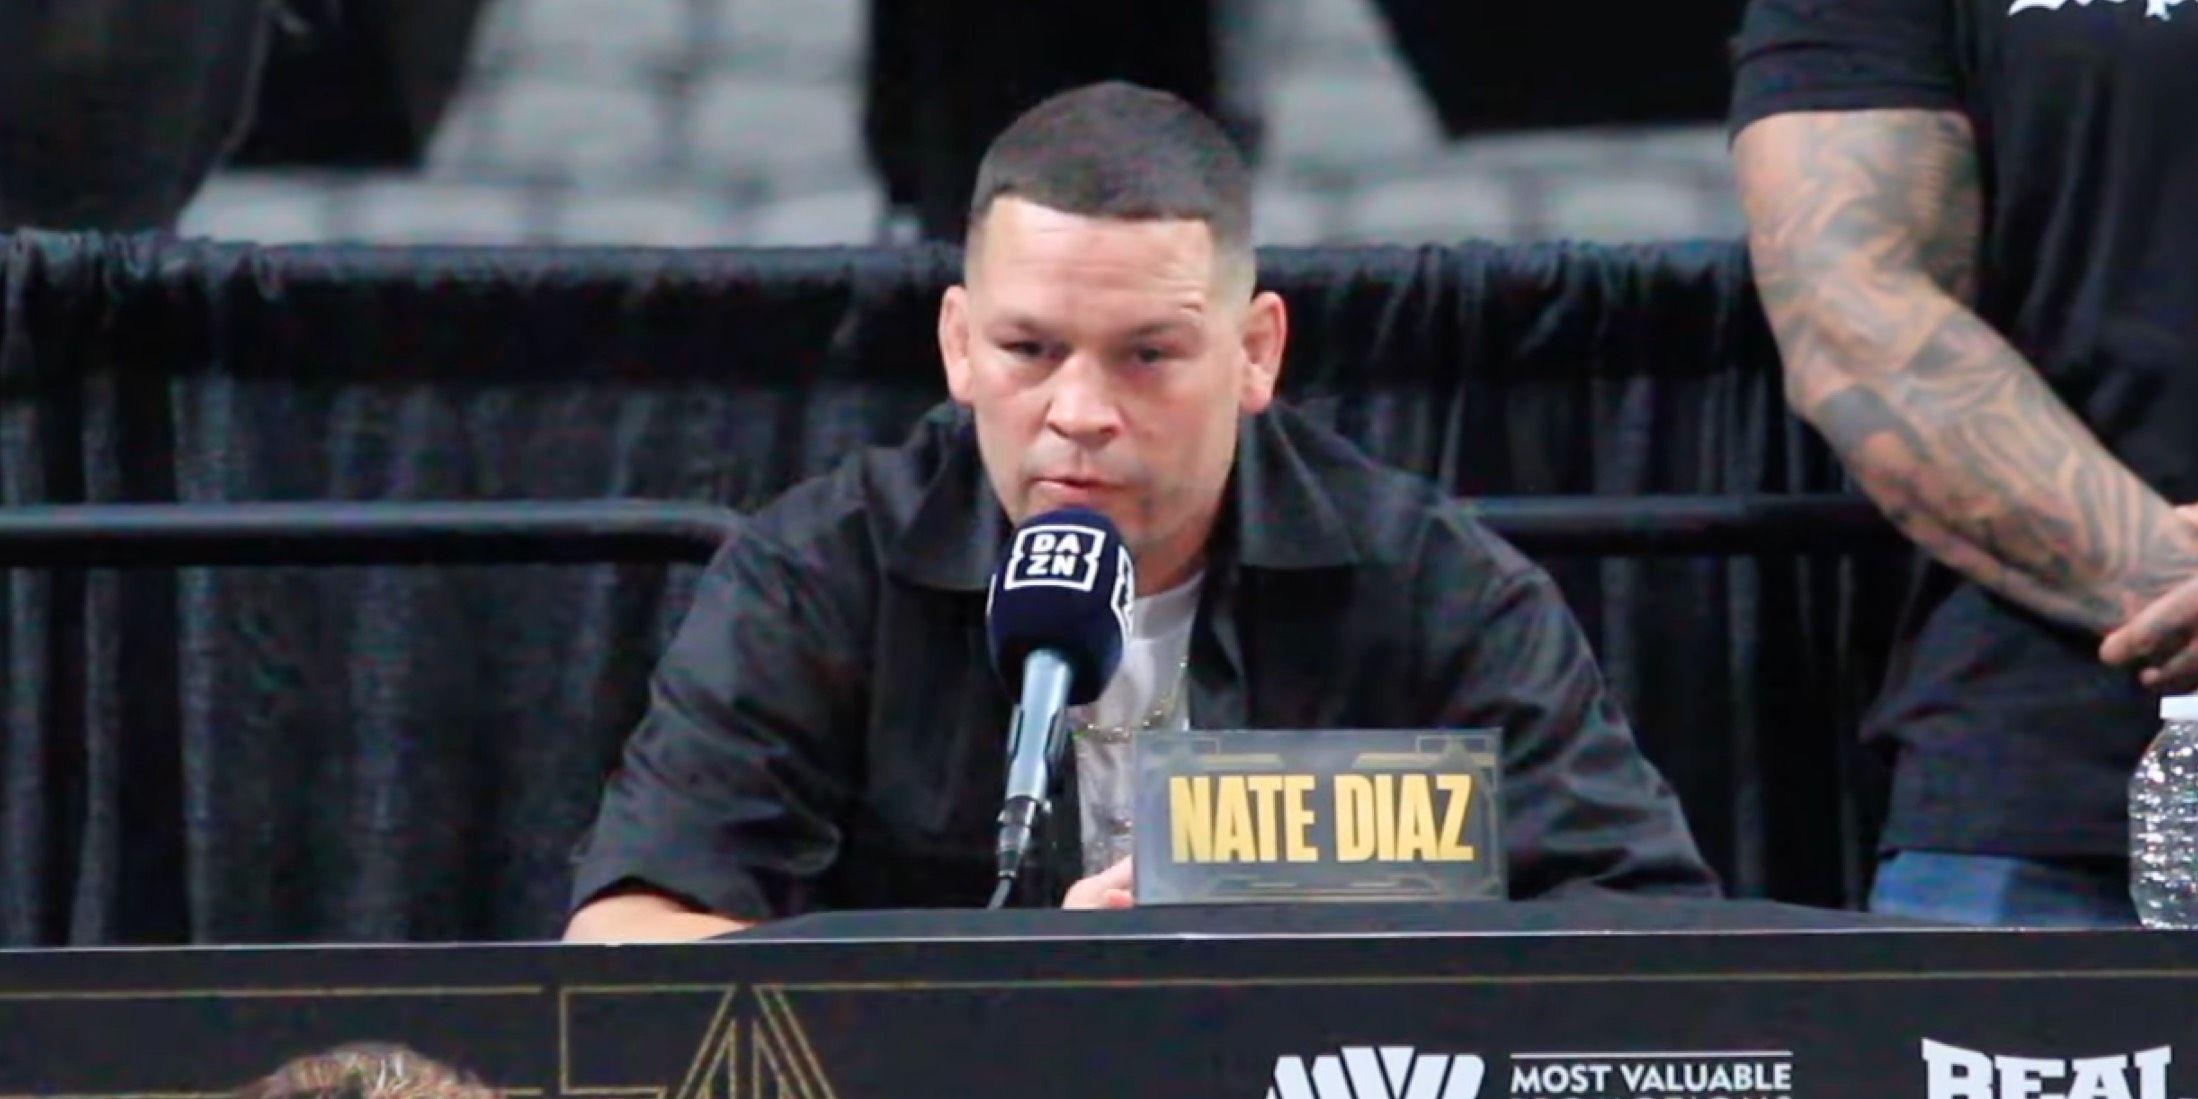 Reporter From Betr Media Disrespects Nick Diaz at Paul vs. Diaz Press Conference